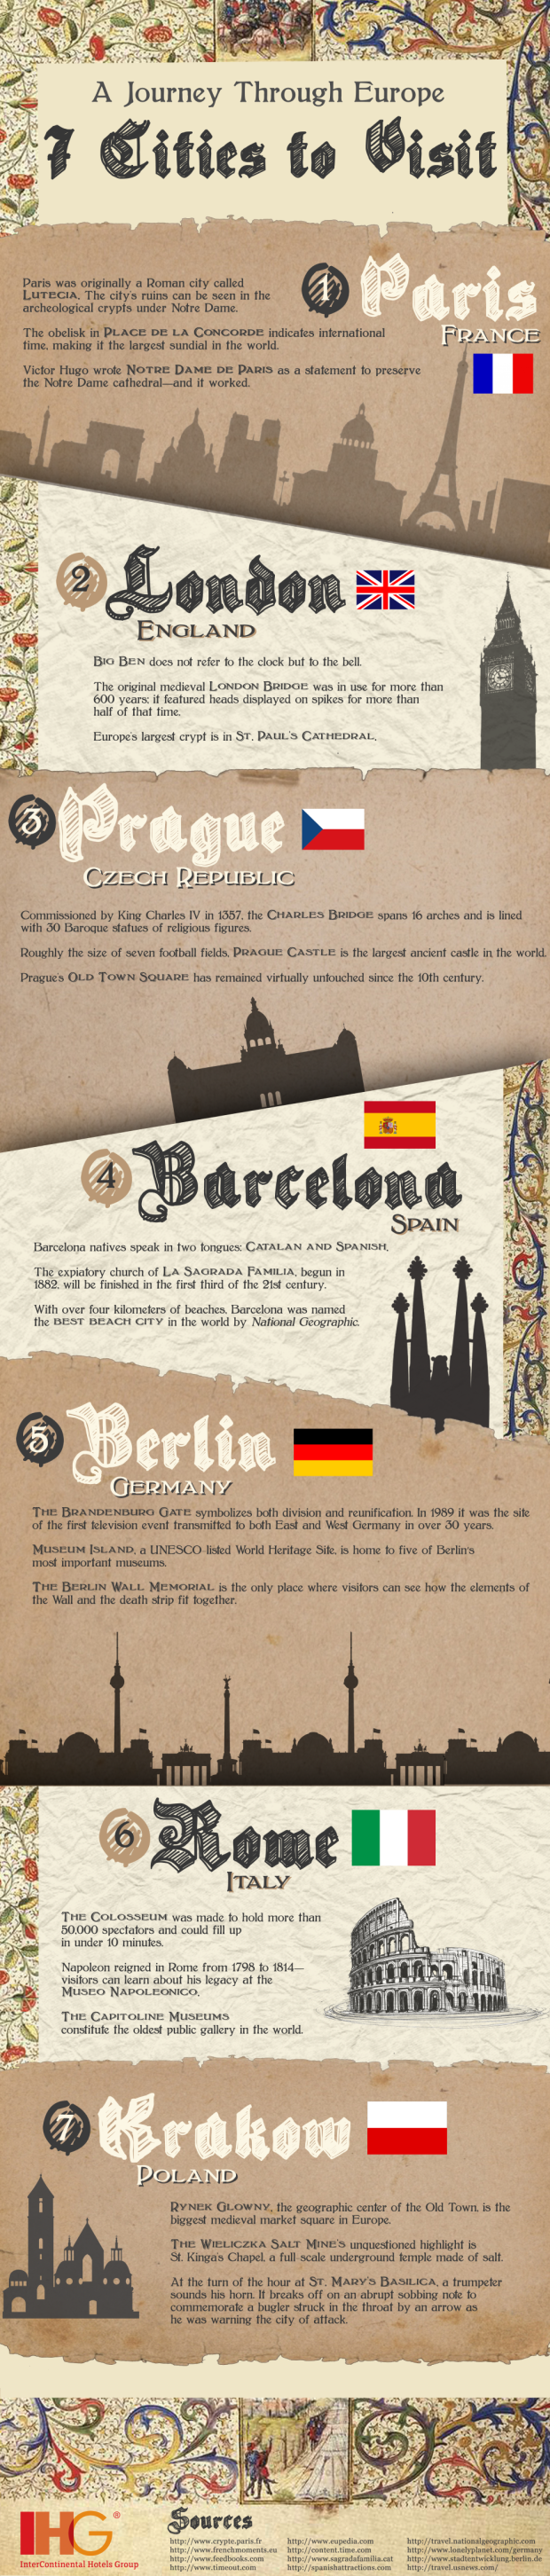 European Cities to Visit_Infographic